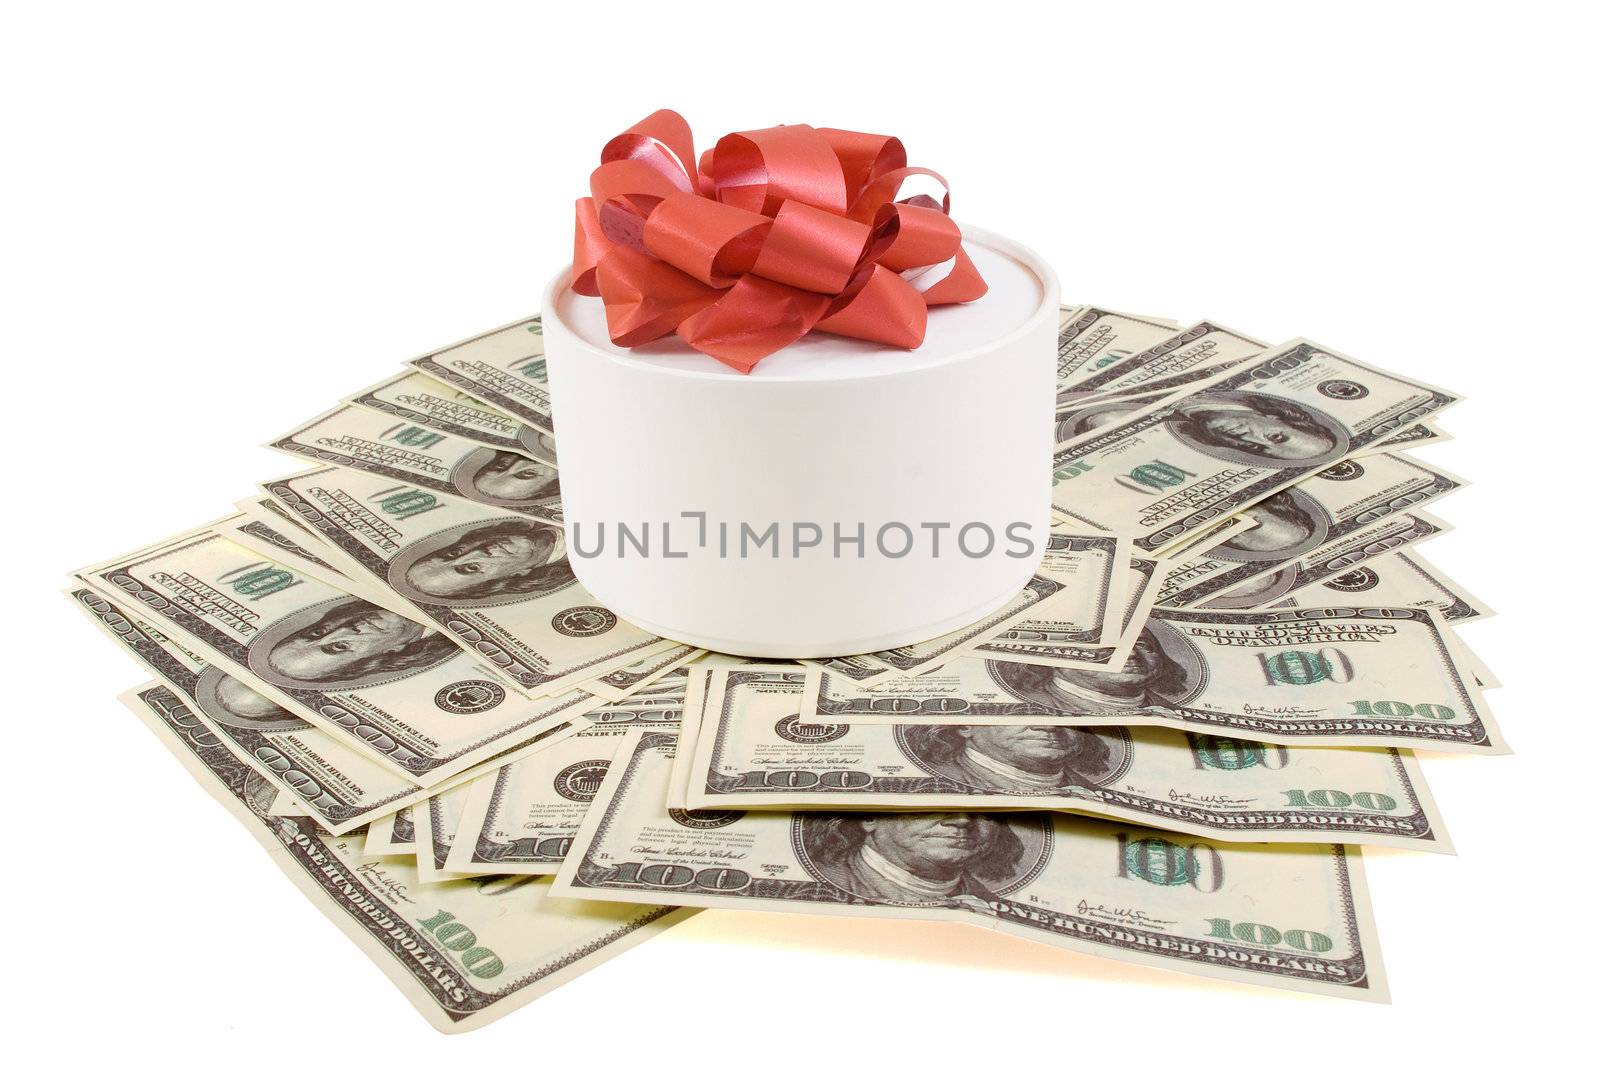 White round box withf banknotes for one hundred dollars by BIG_TAU